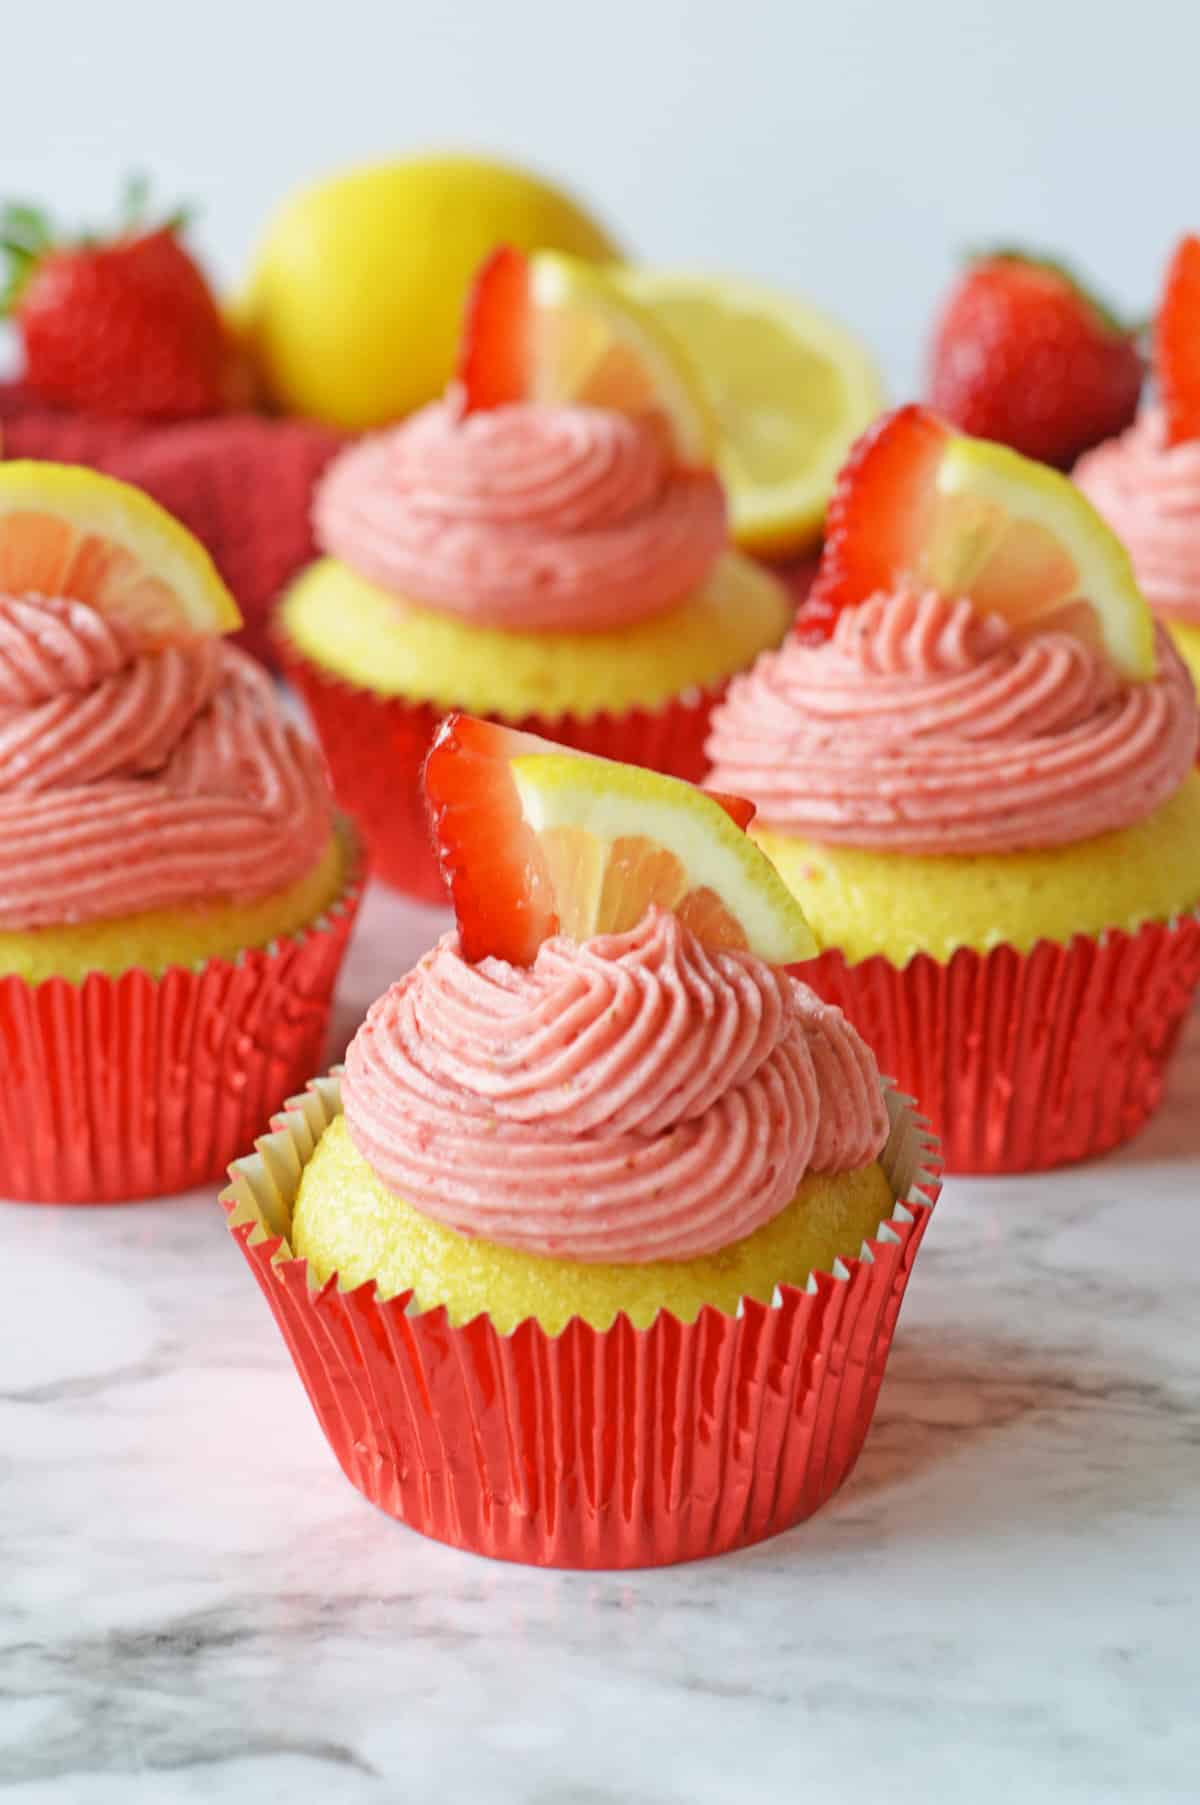 Strawberry lemonade cupcakes from cake mix with a homemade strawberry lemon frosting and finished with fresh lemon and strawberry slices.